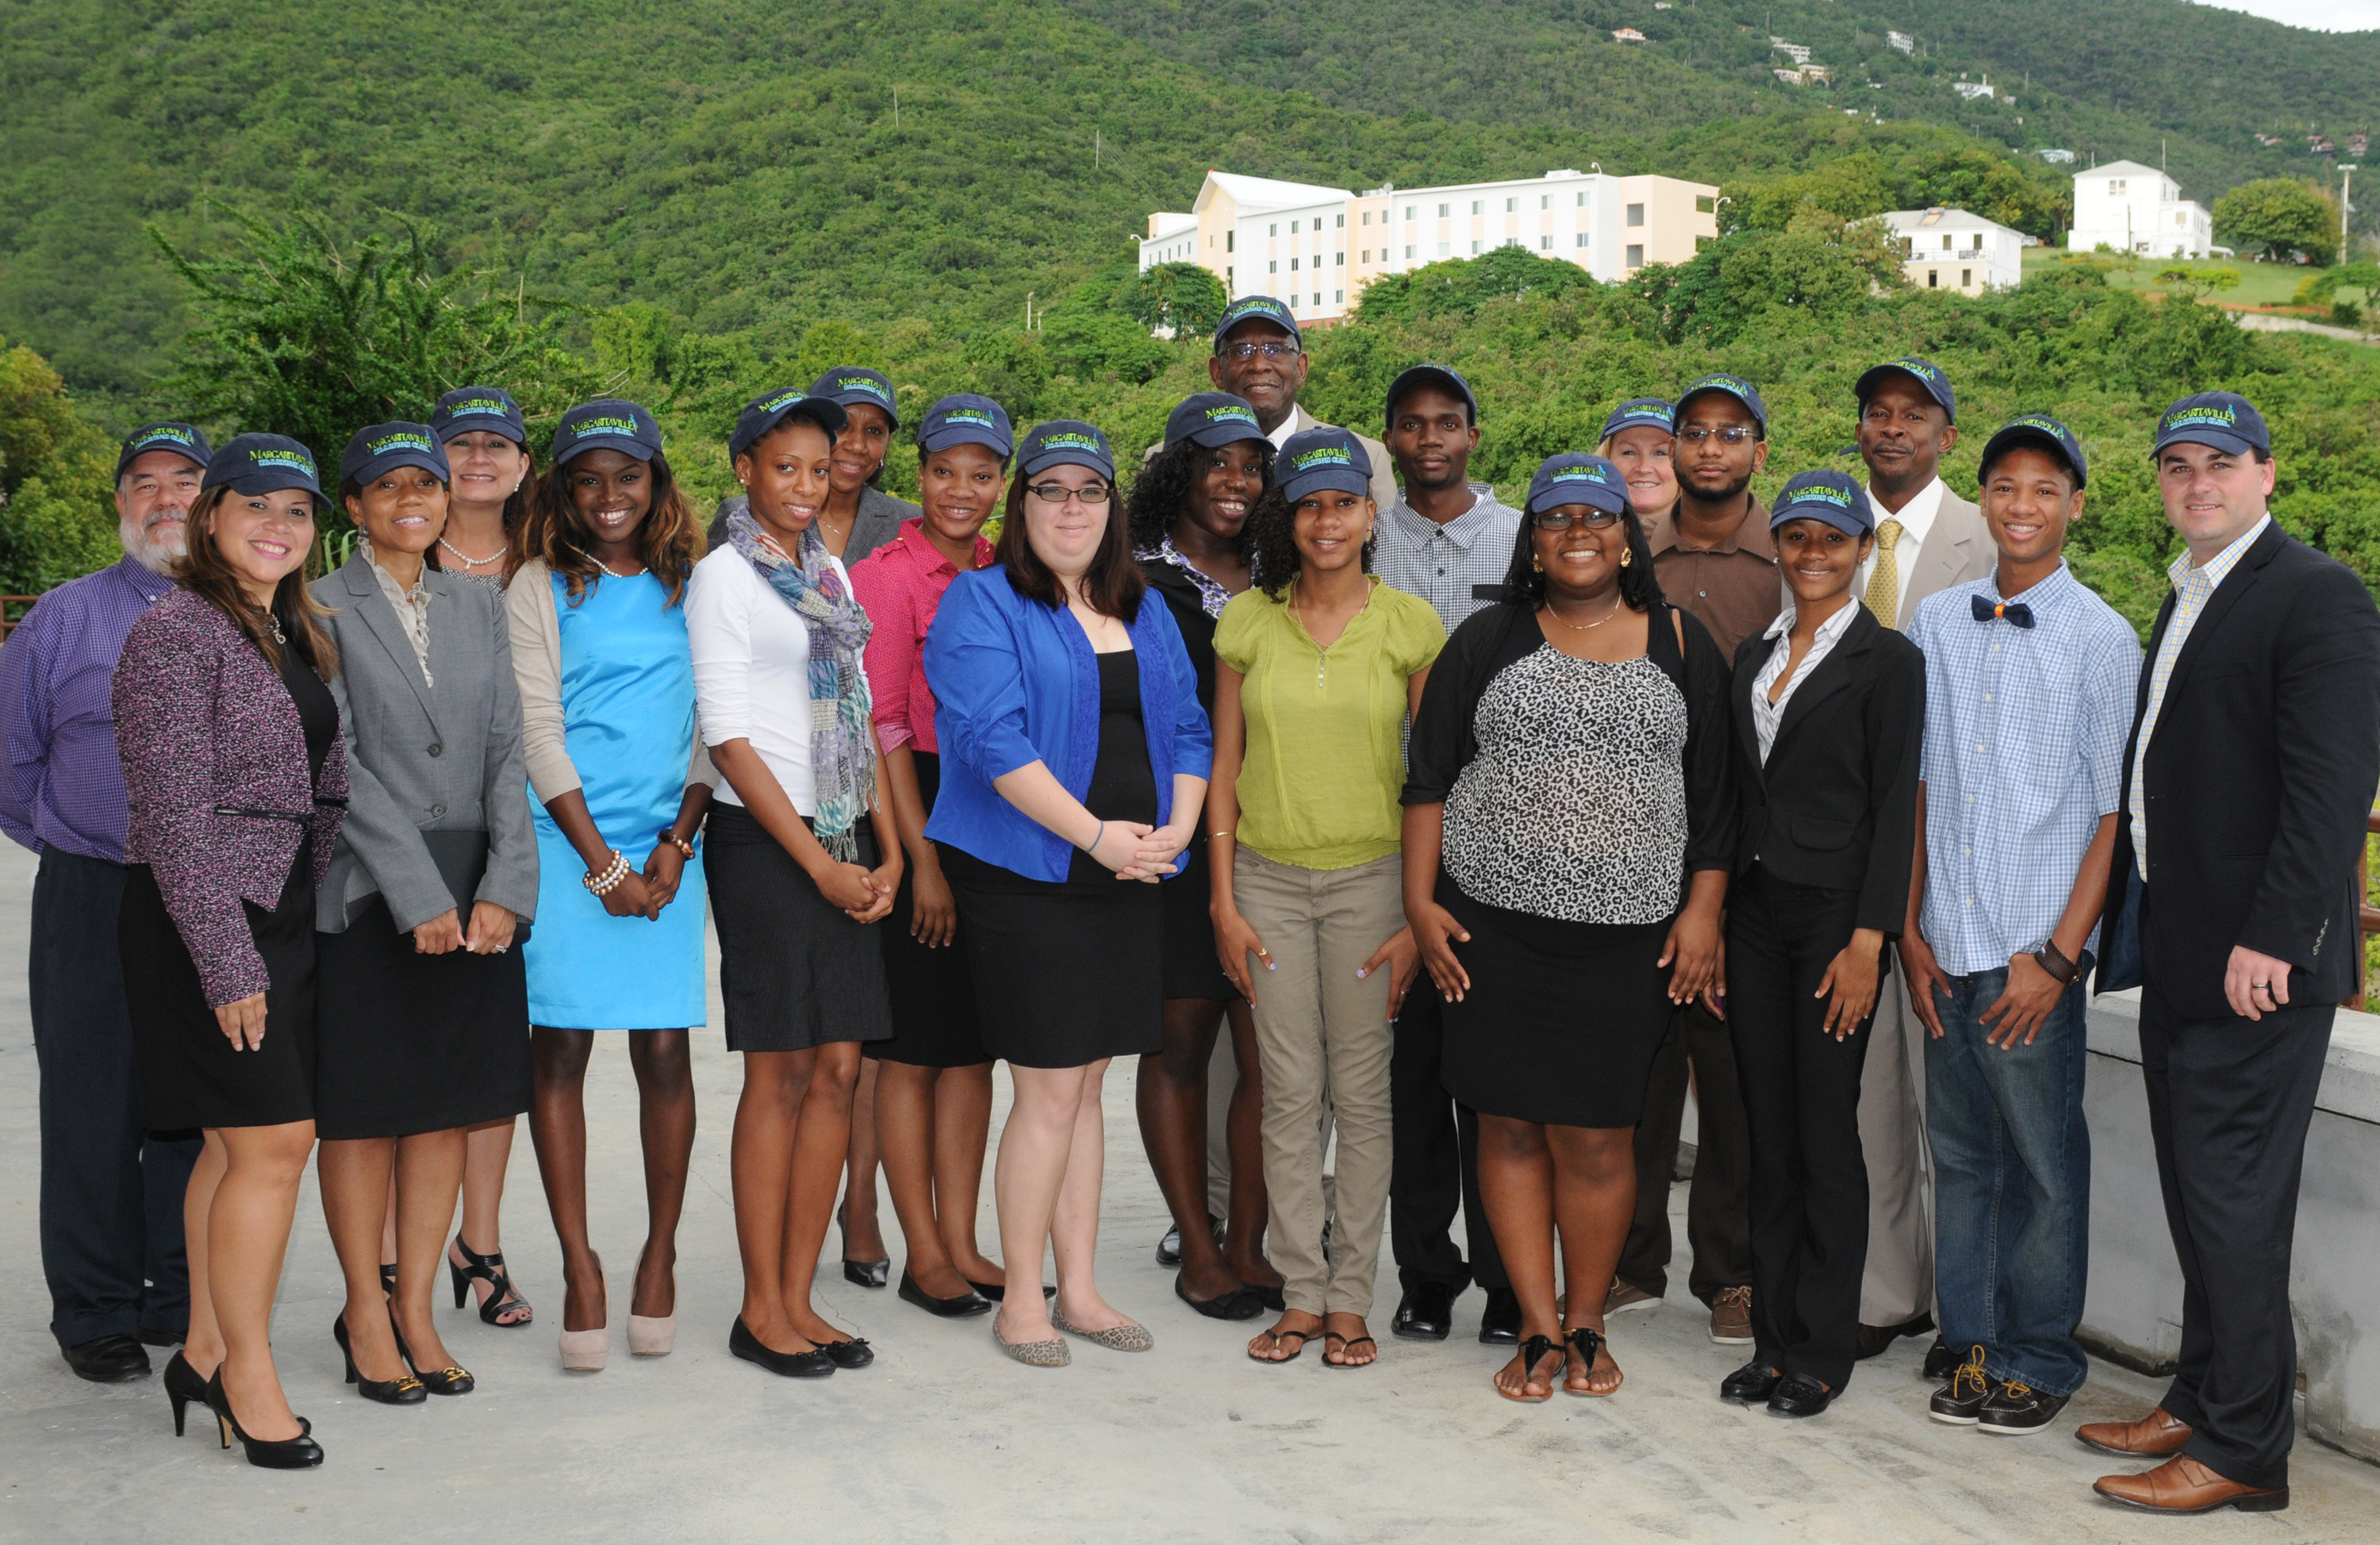 Officials from Wyndham Vacation Ownership join with some of the 59 Officials from Wyndham Vacation Ownership join with some of the 59 UVI students enrolled in the University’s BA in Hospitality and Tourism Management Program. The company presented a check of $5,000 to support the program and $10,000 scholarships to UVI students Demi Moore and Daynia Dowling on Nov. 21.UVI students enrolled in the University’s BA in Hospitality and Tourism Management Program. The company presented a check of $5,000 to support the program and $10,000 scholarships to UVI students Demi Moore and Daynia Dowling on Nov. 21.